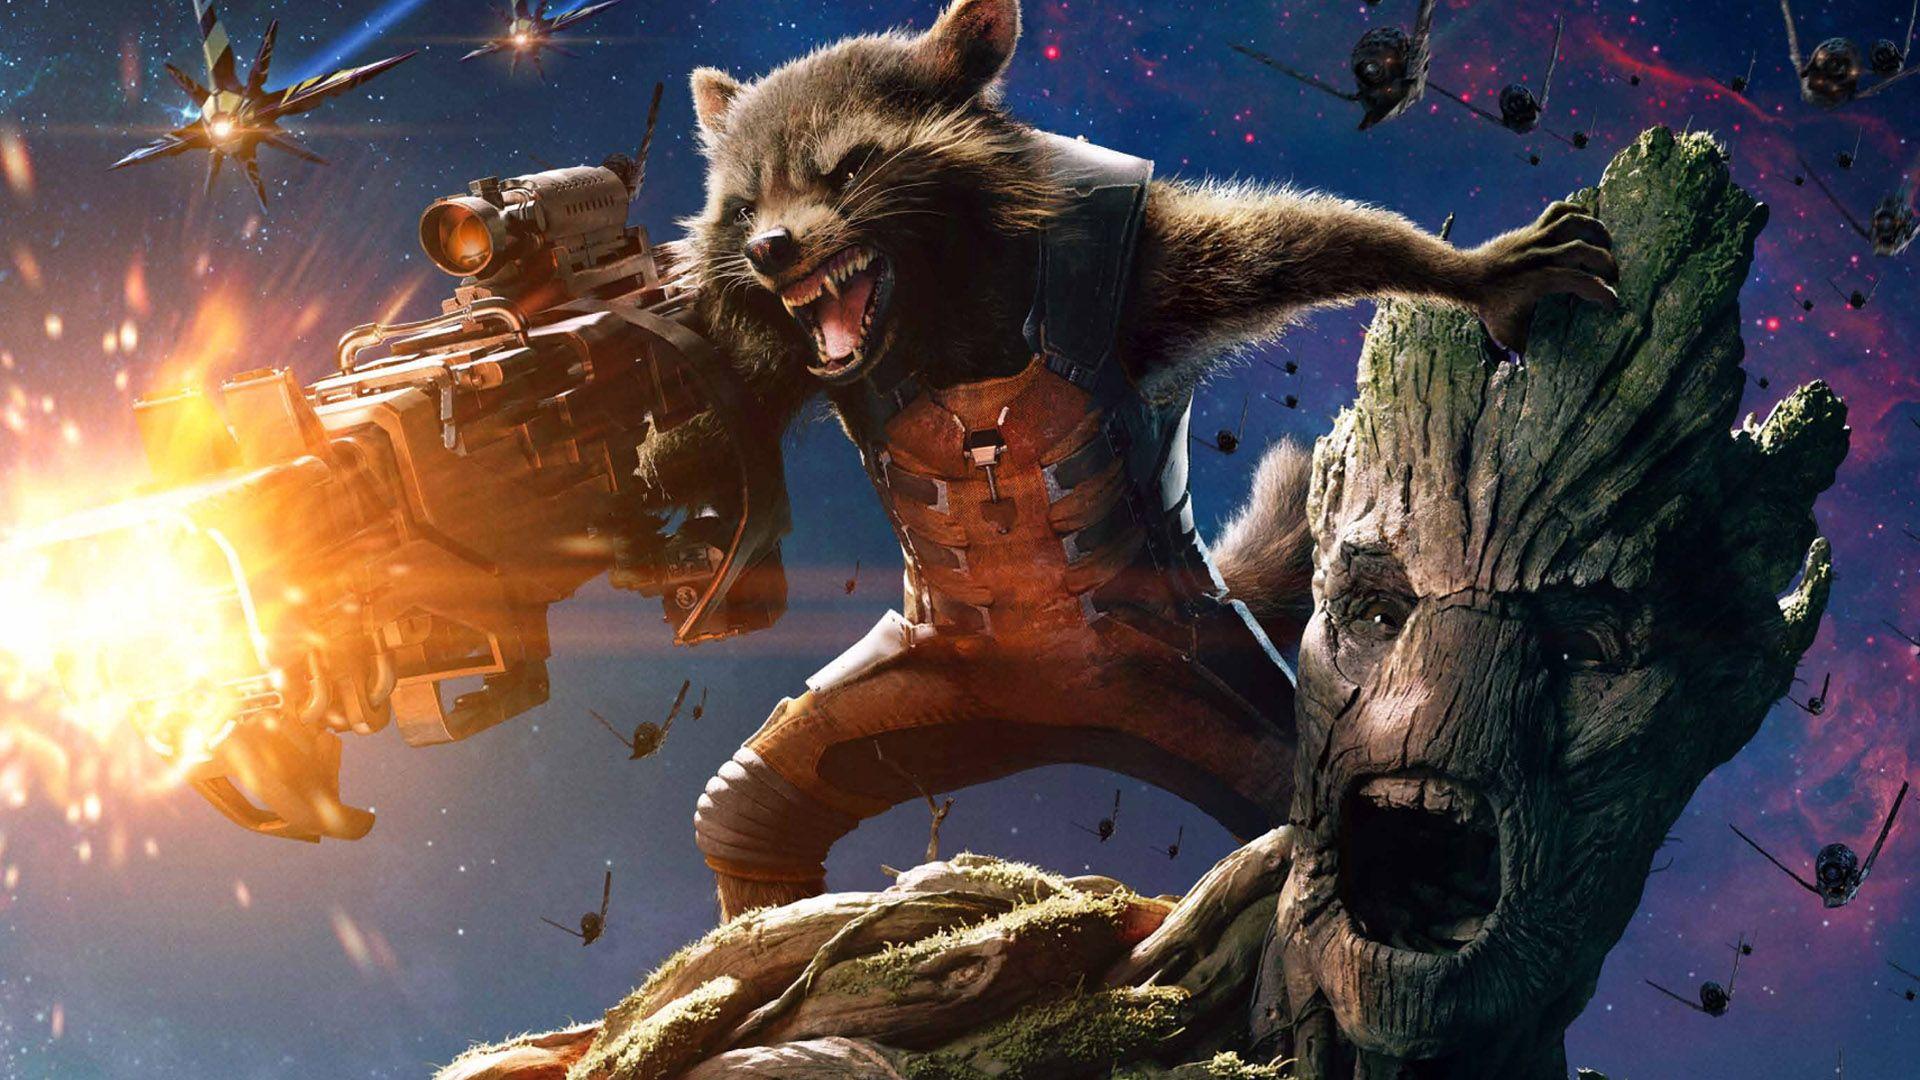 Rocket Raccoon And Groot In Guardians Of The Galaxy